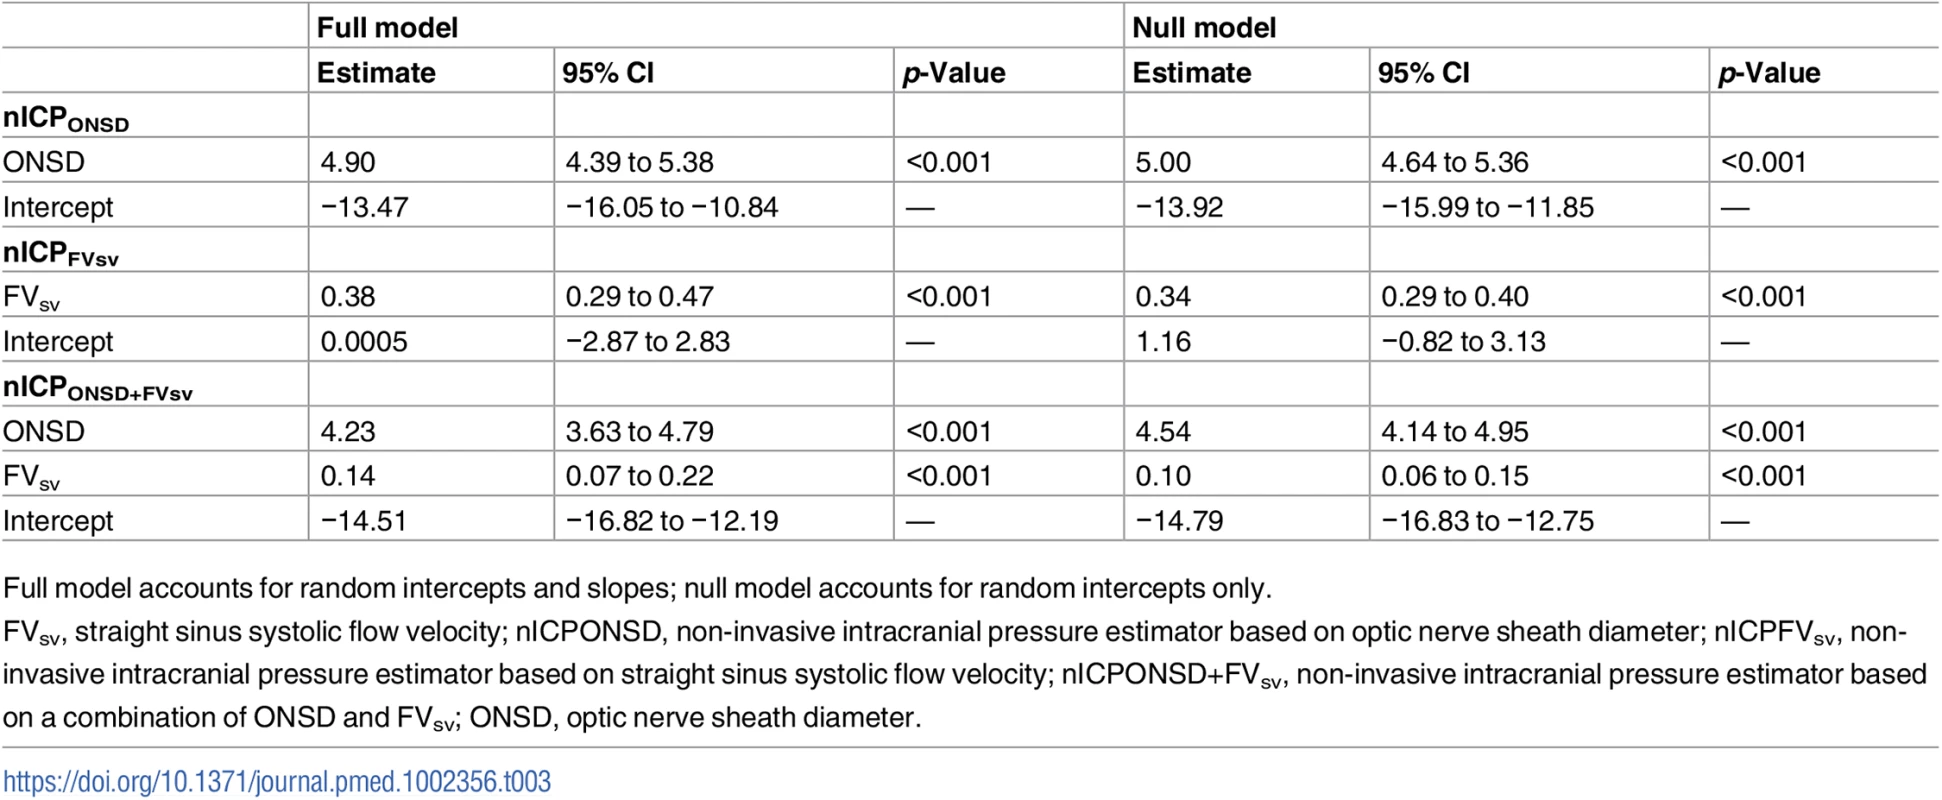 Summary of the linear mixed effects models of ICP and the non-invasive estimators across all measurement points (N = 445).